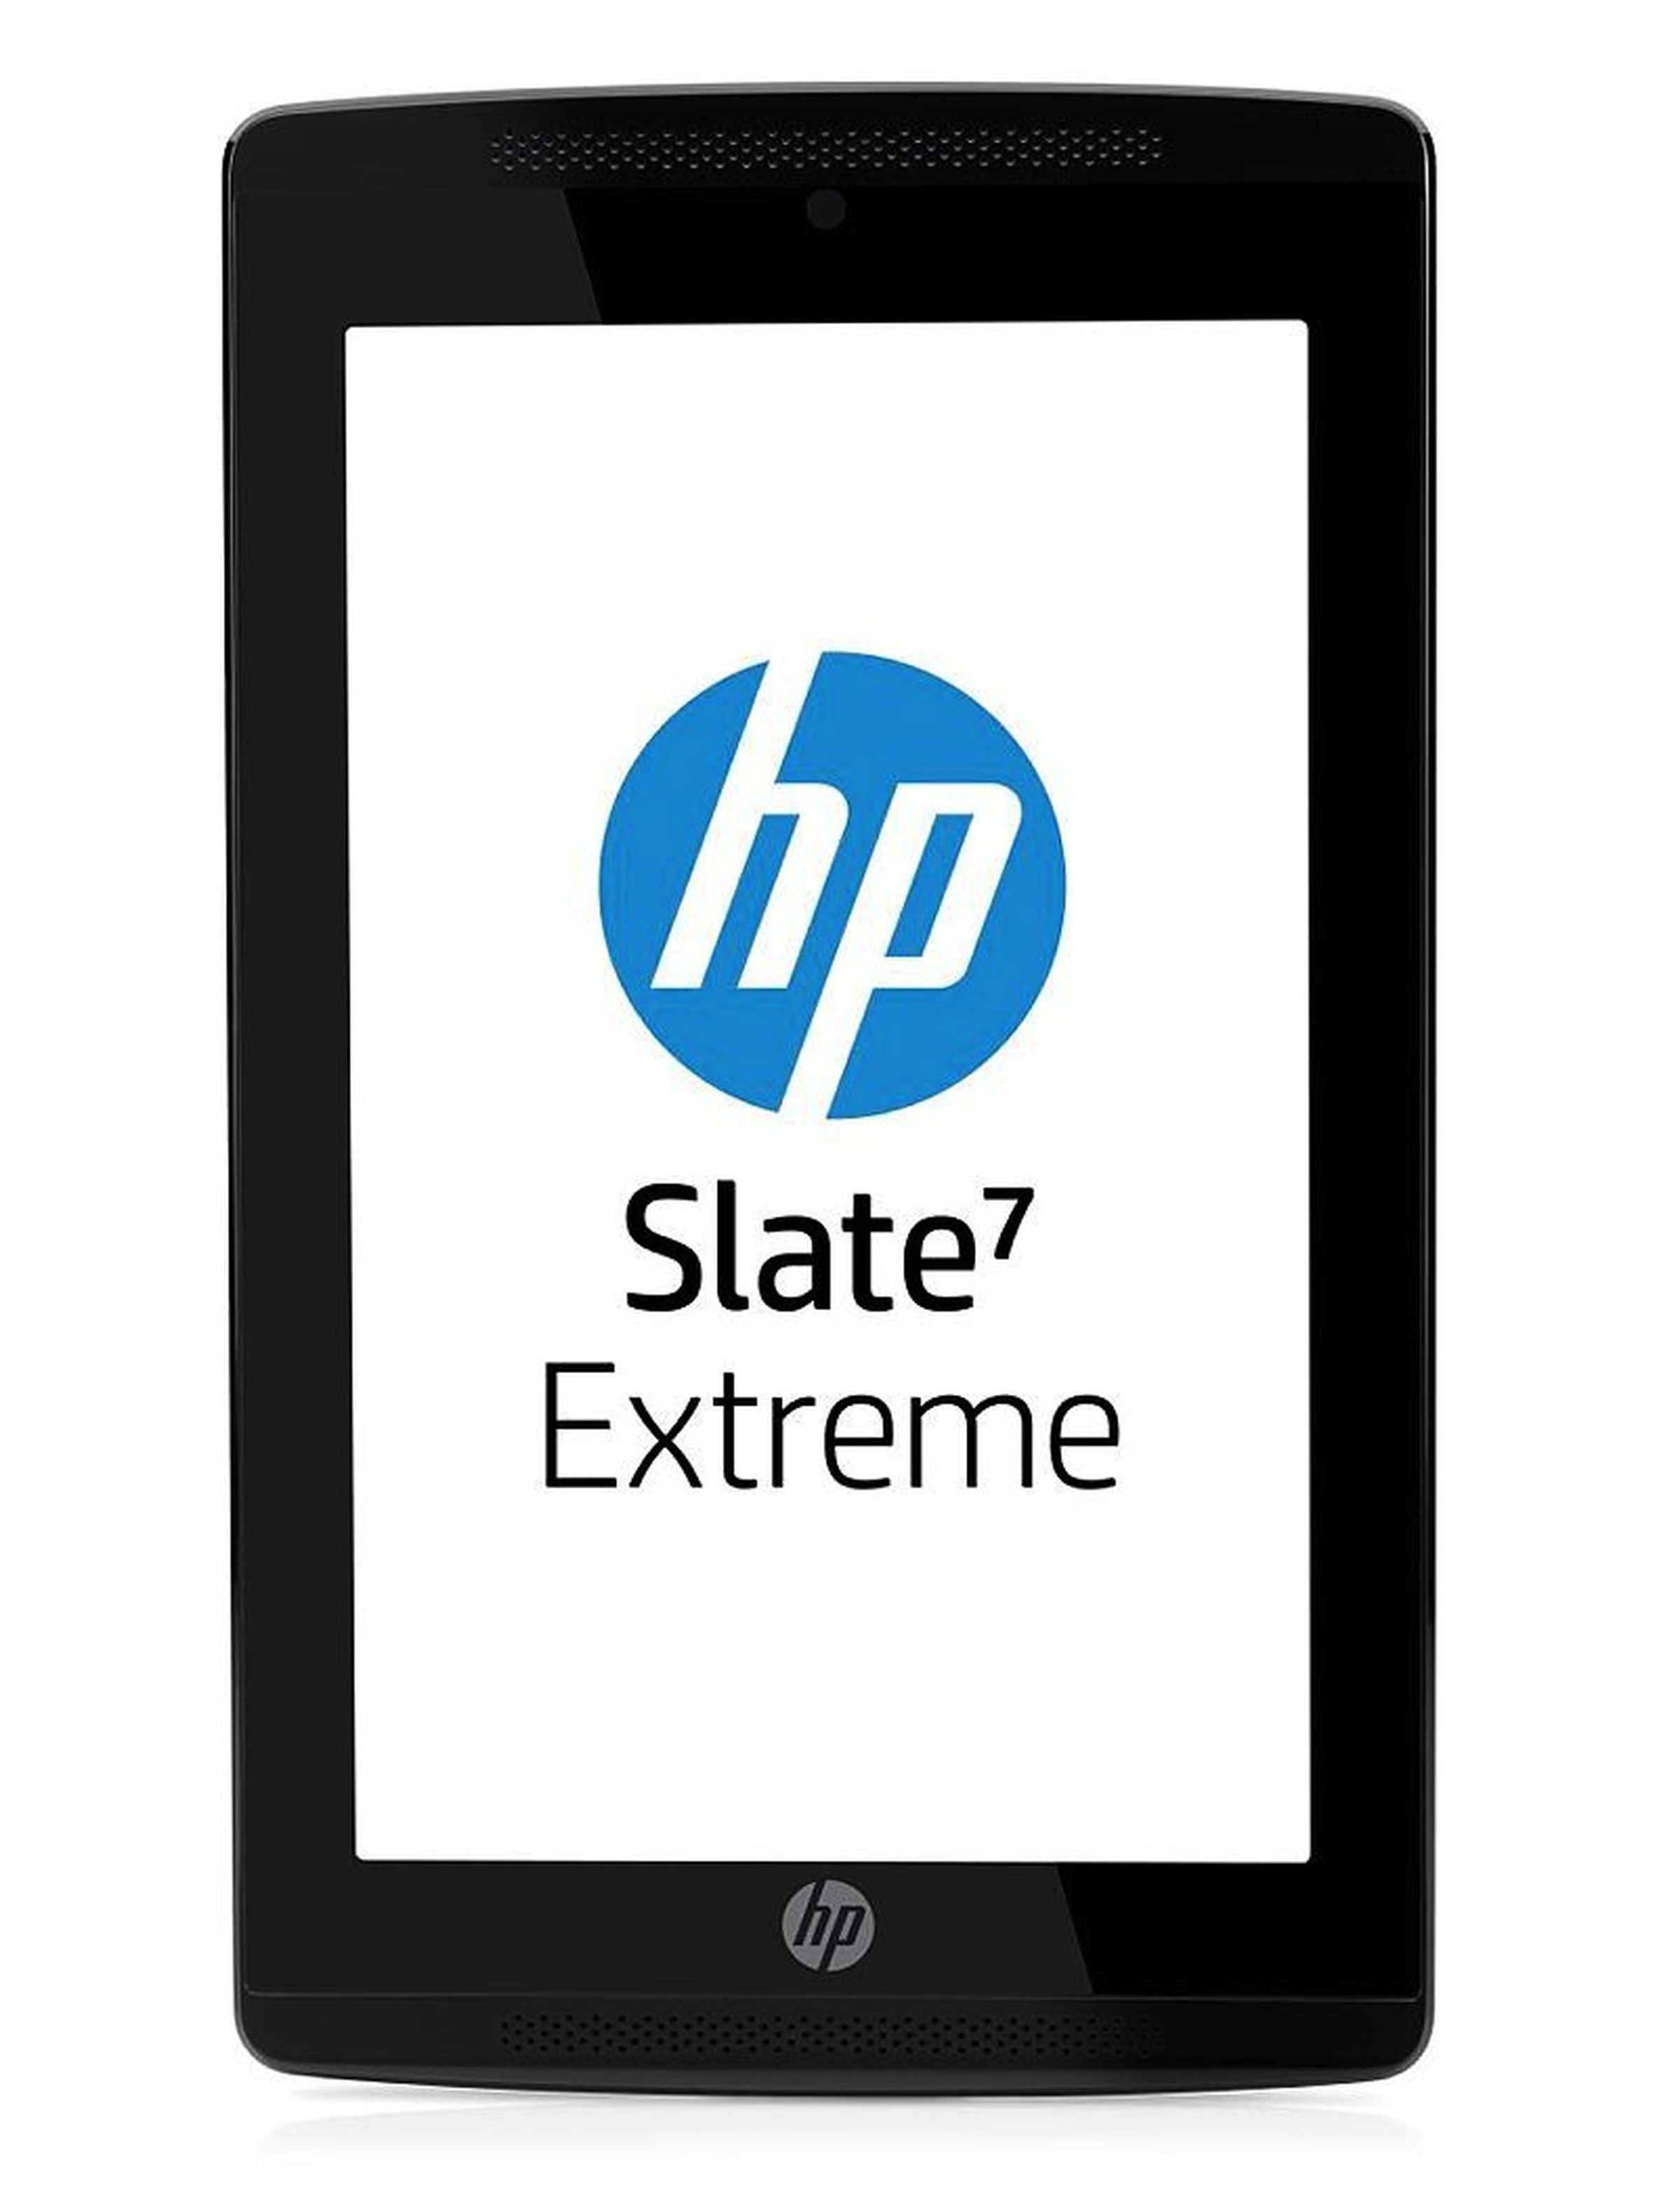 HP Slate and Omni tablet press pictures